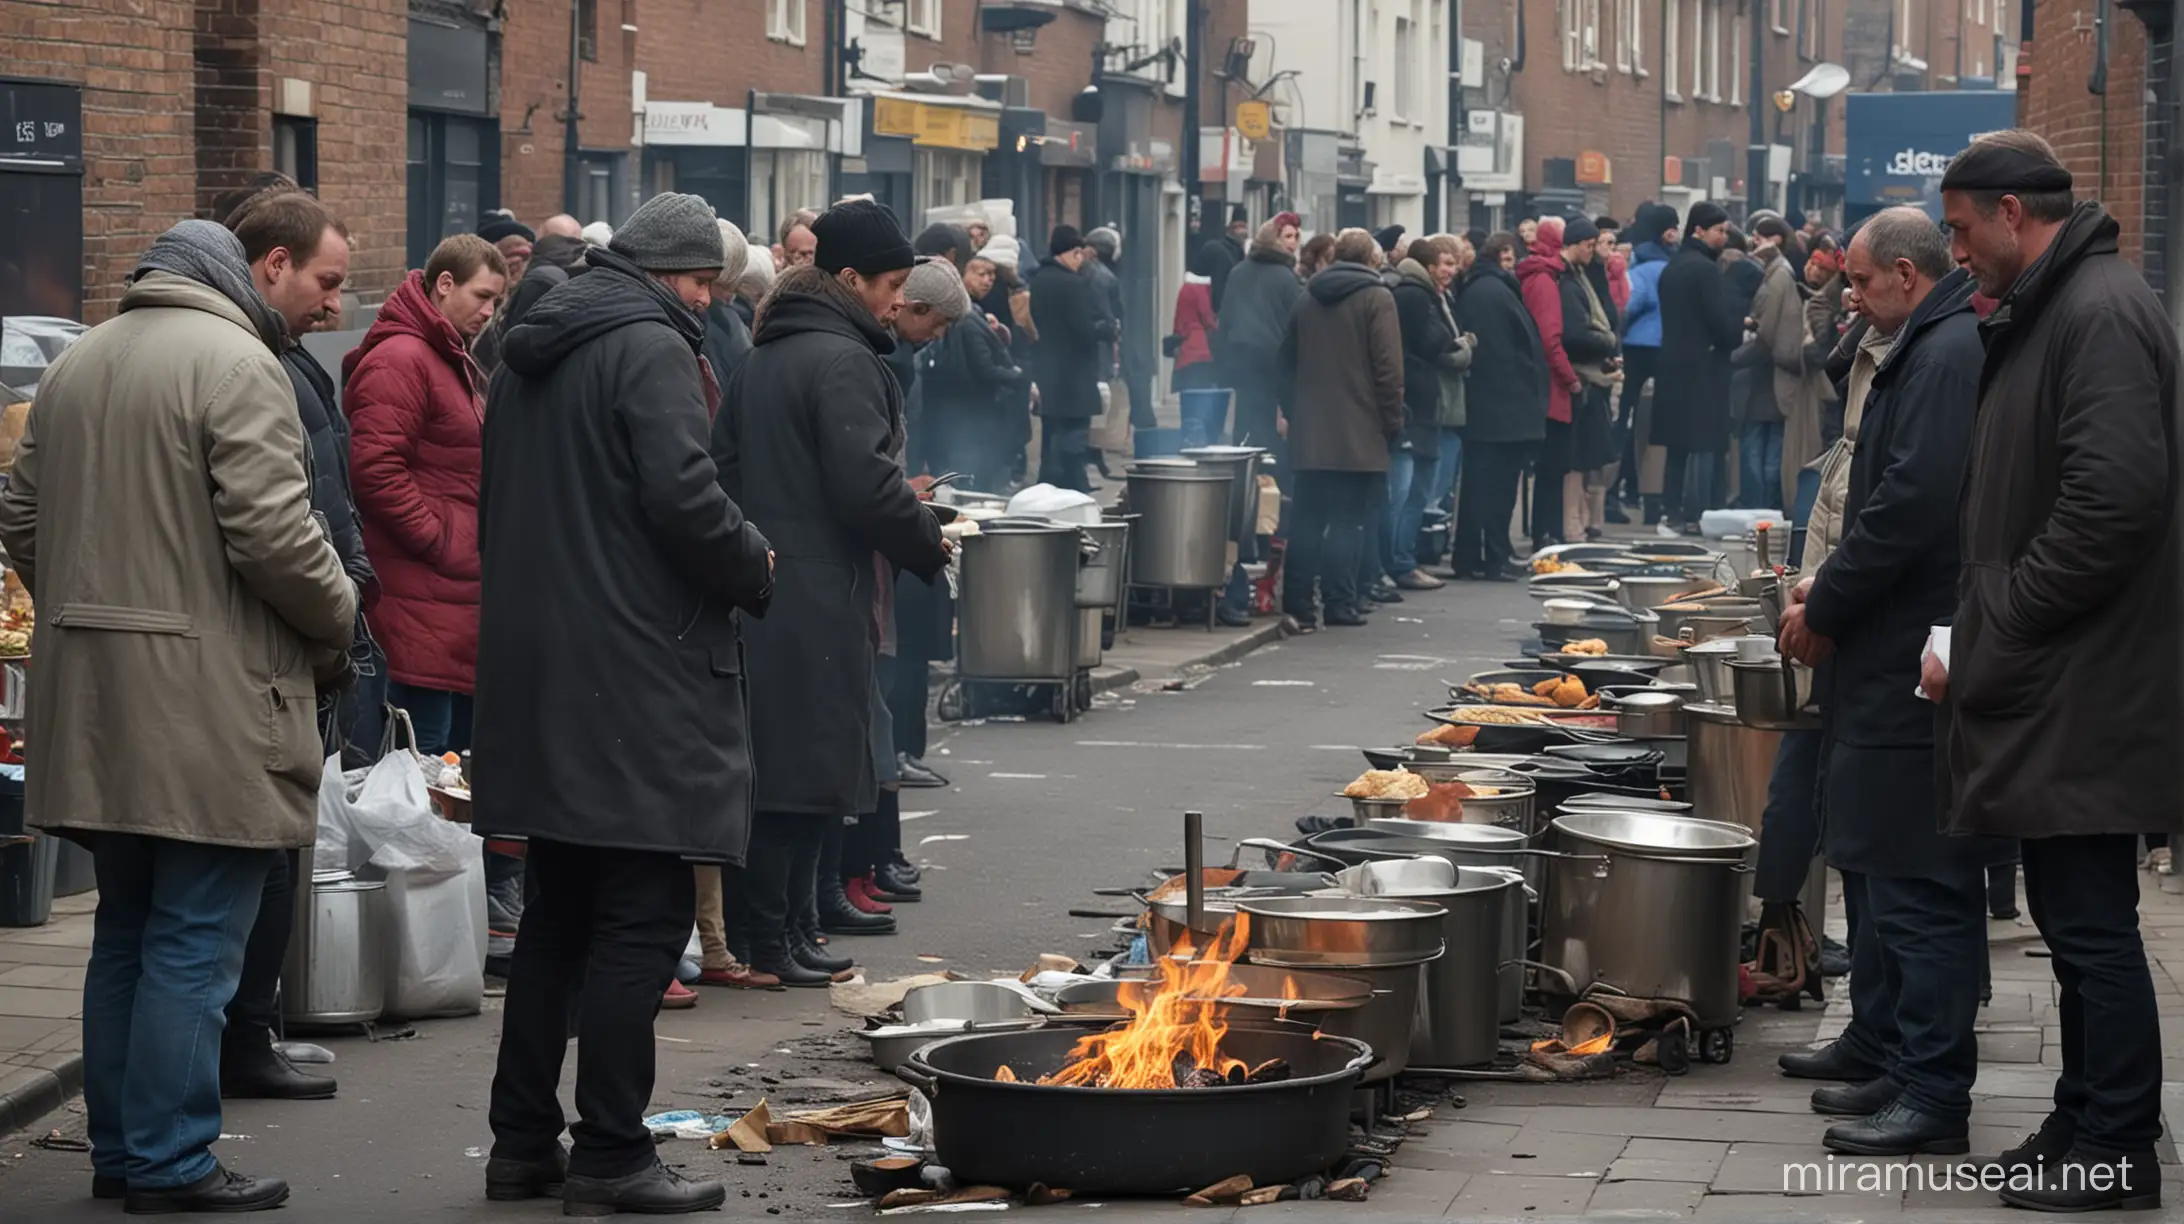 UK City Street Scene with Impoverished Residents Queuing at a Soup Kitchen Amidst Urban Grime